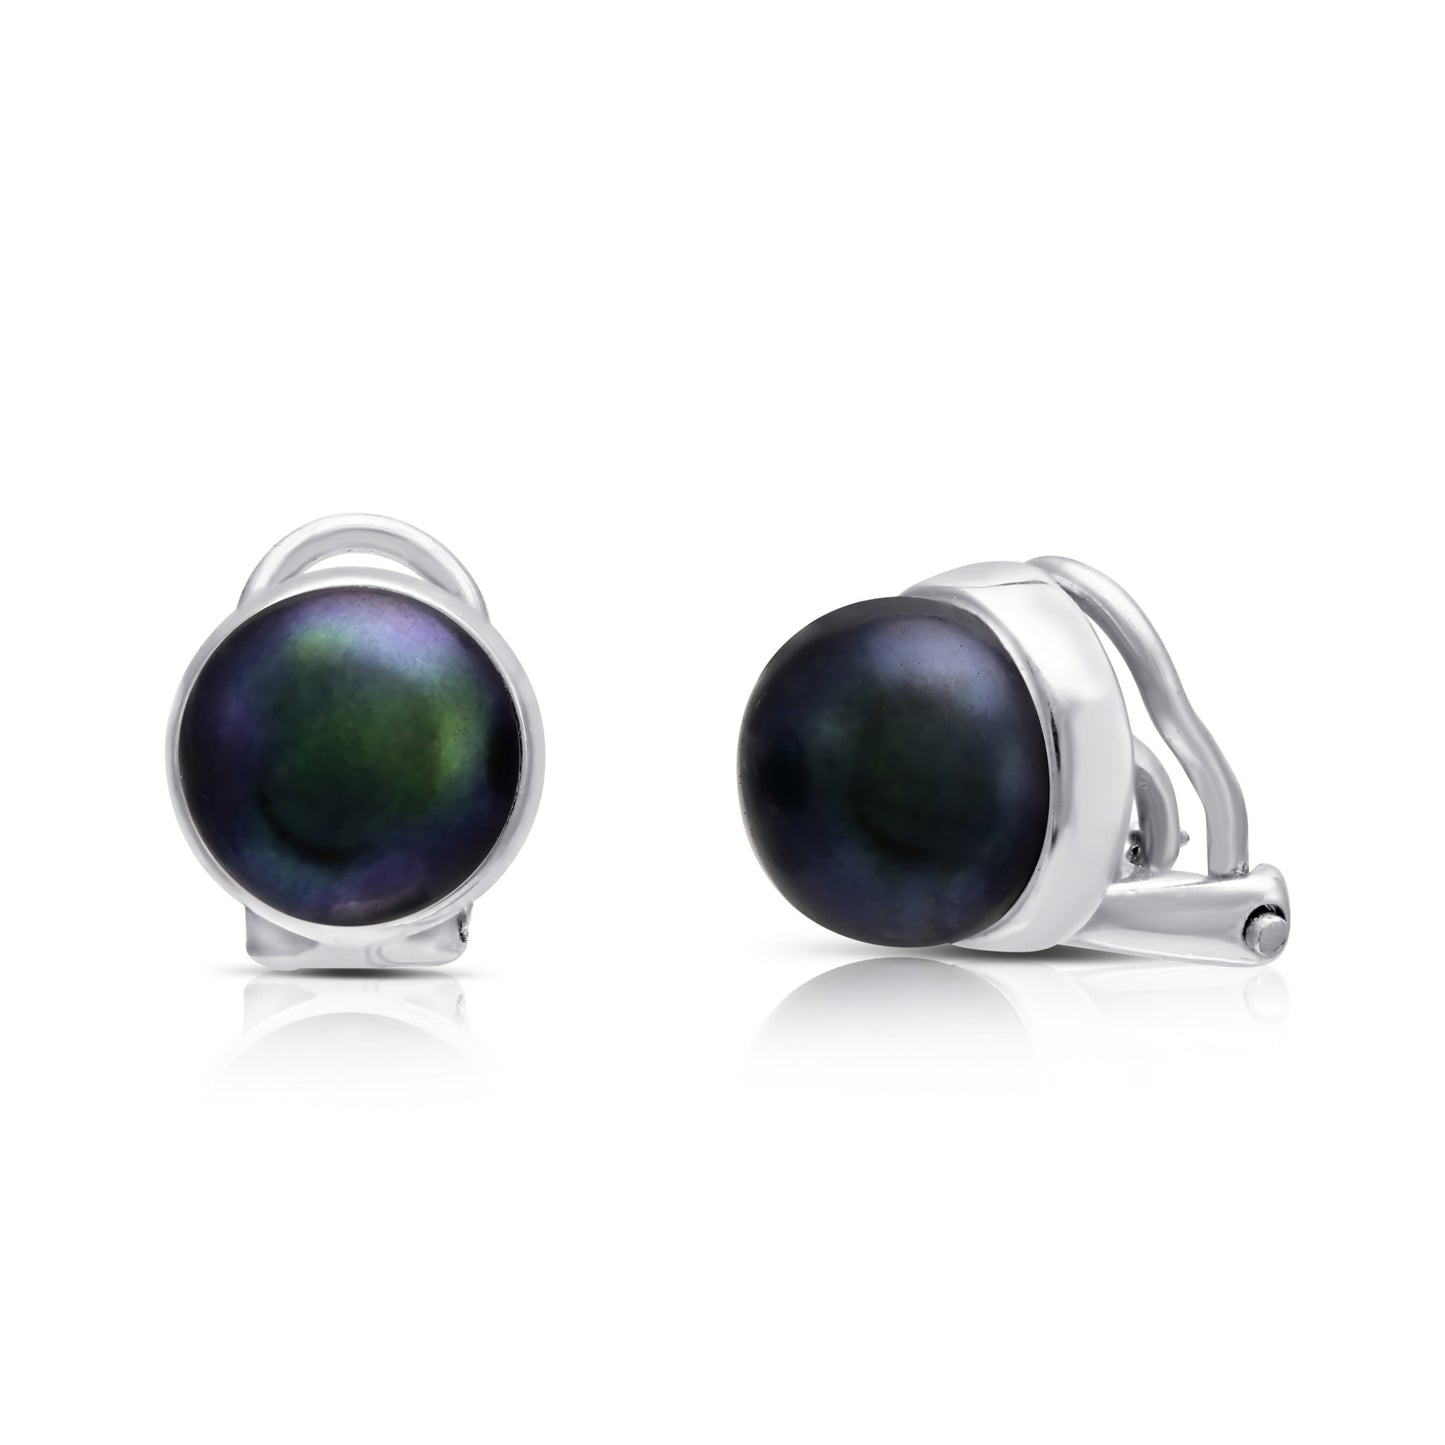 Margarita black cultured freshwater button pearl clip-on earrings with silver surround